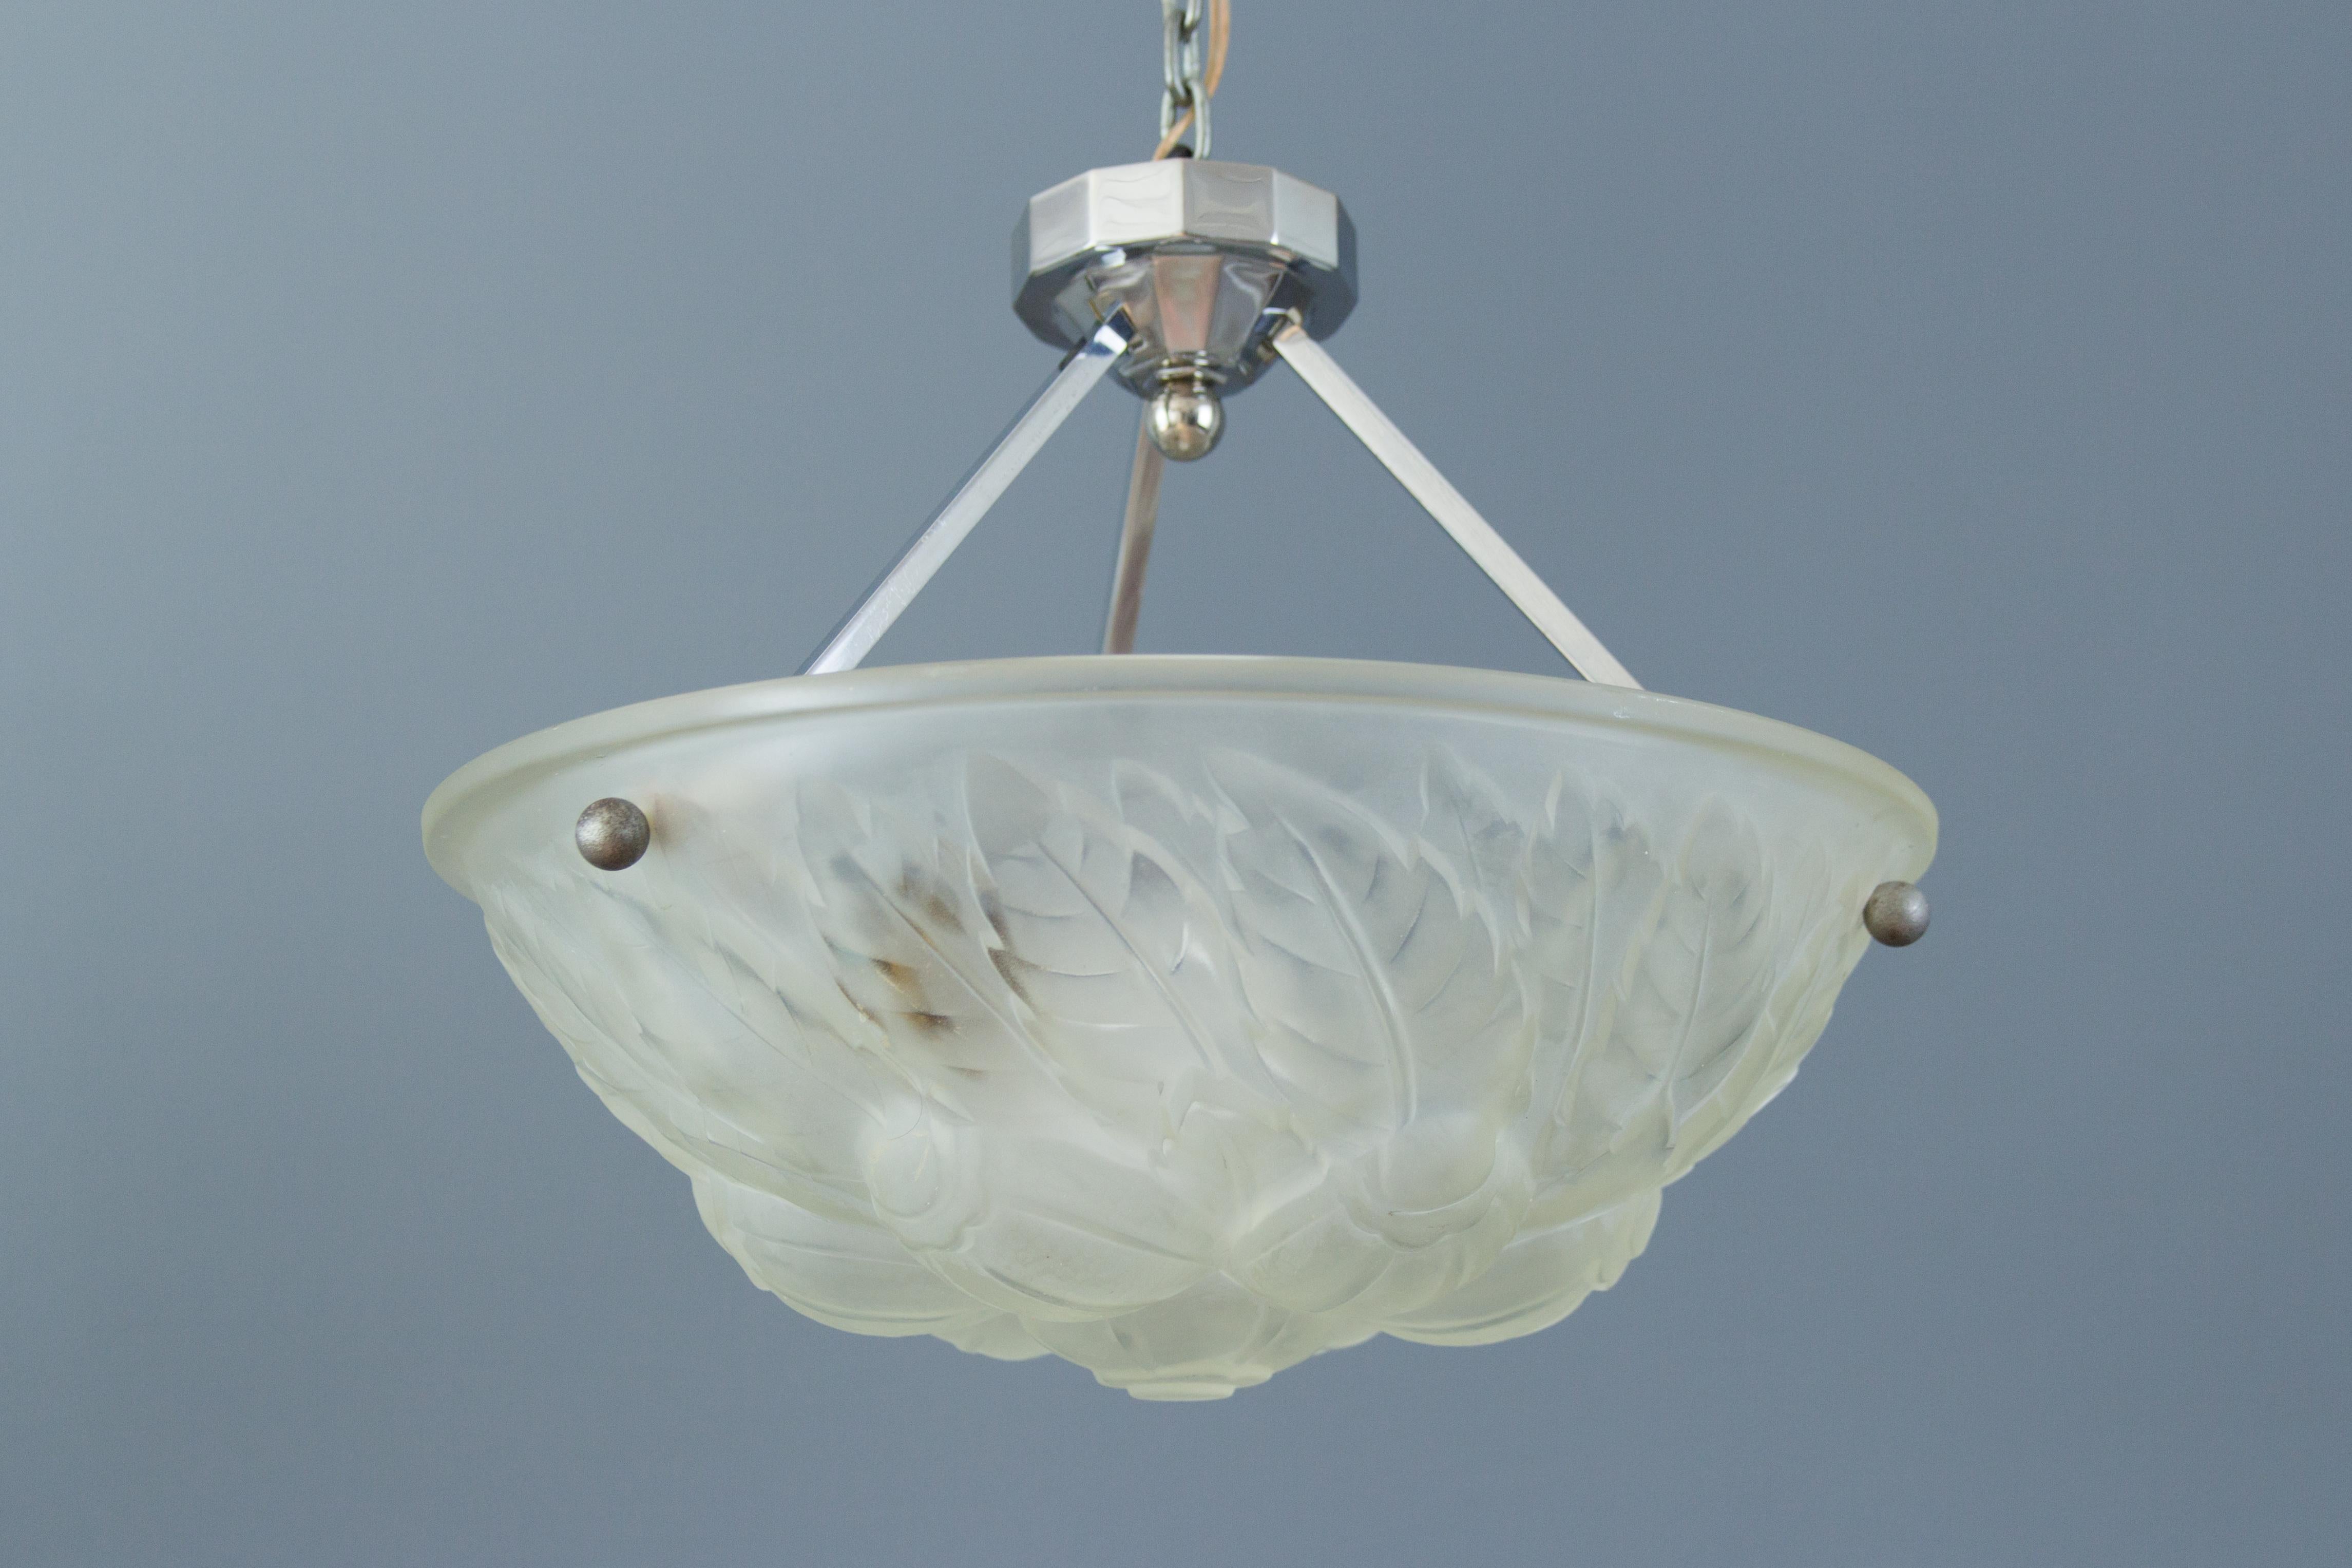 Molded French Art Deco Frosted Glass Pendant Chandelier by Verrerie des Vosges, 1930s